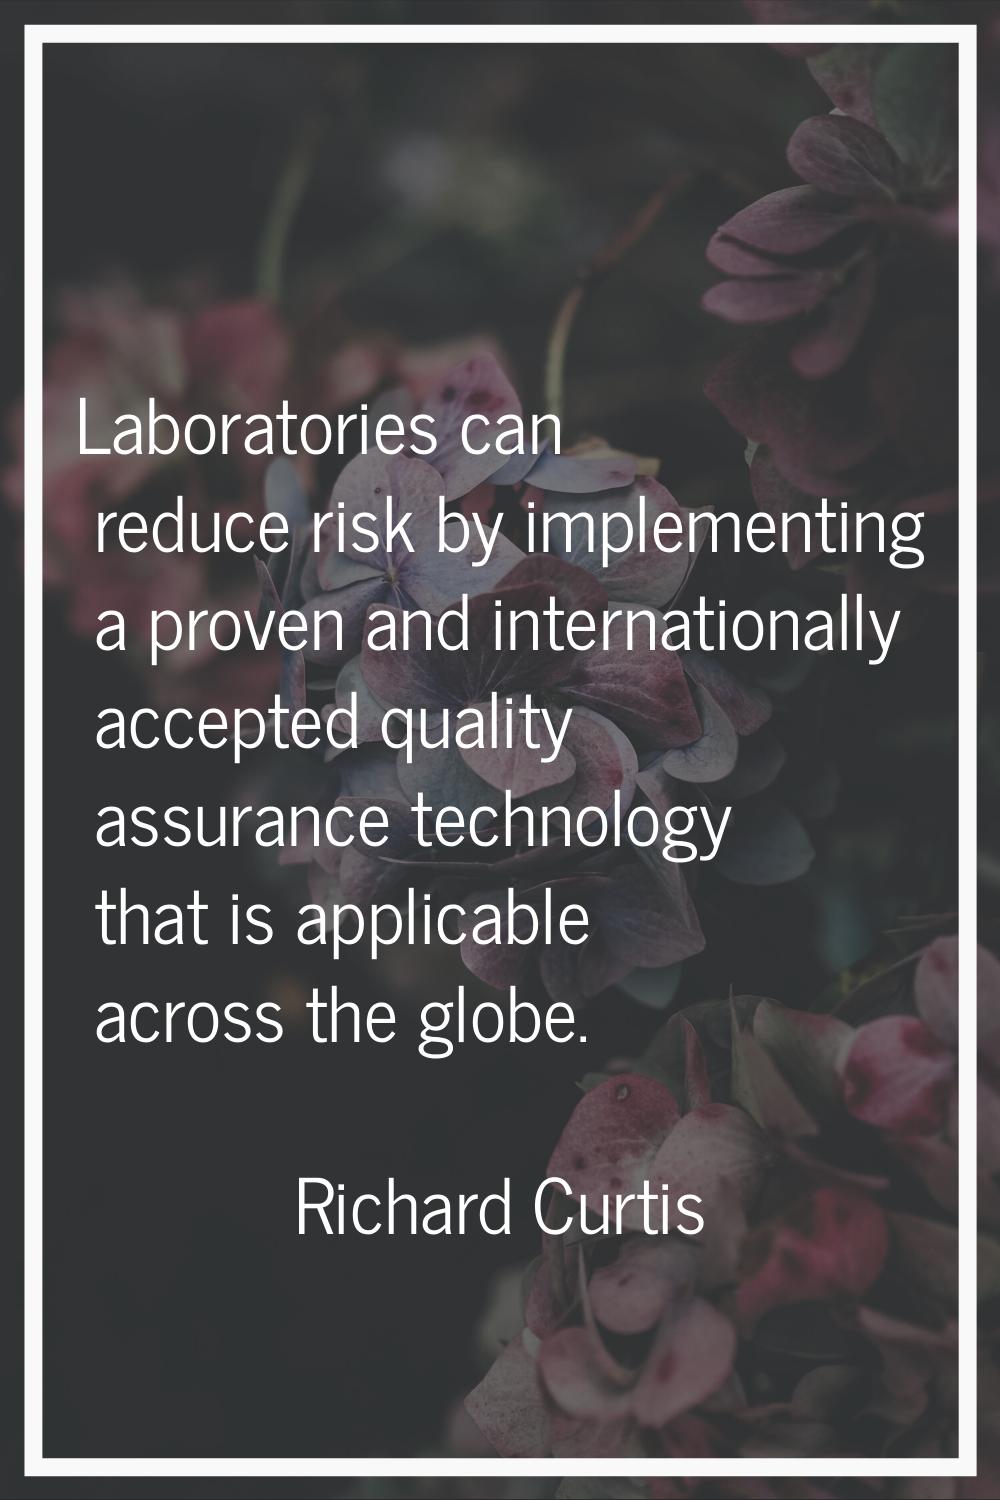 Laboratories can reduce risk by implementing a proven and internationally accepted quality assuranc